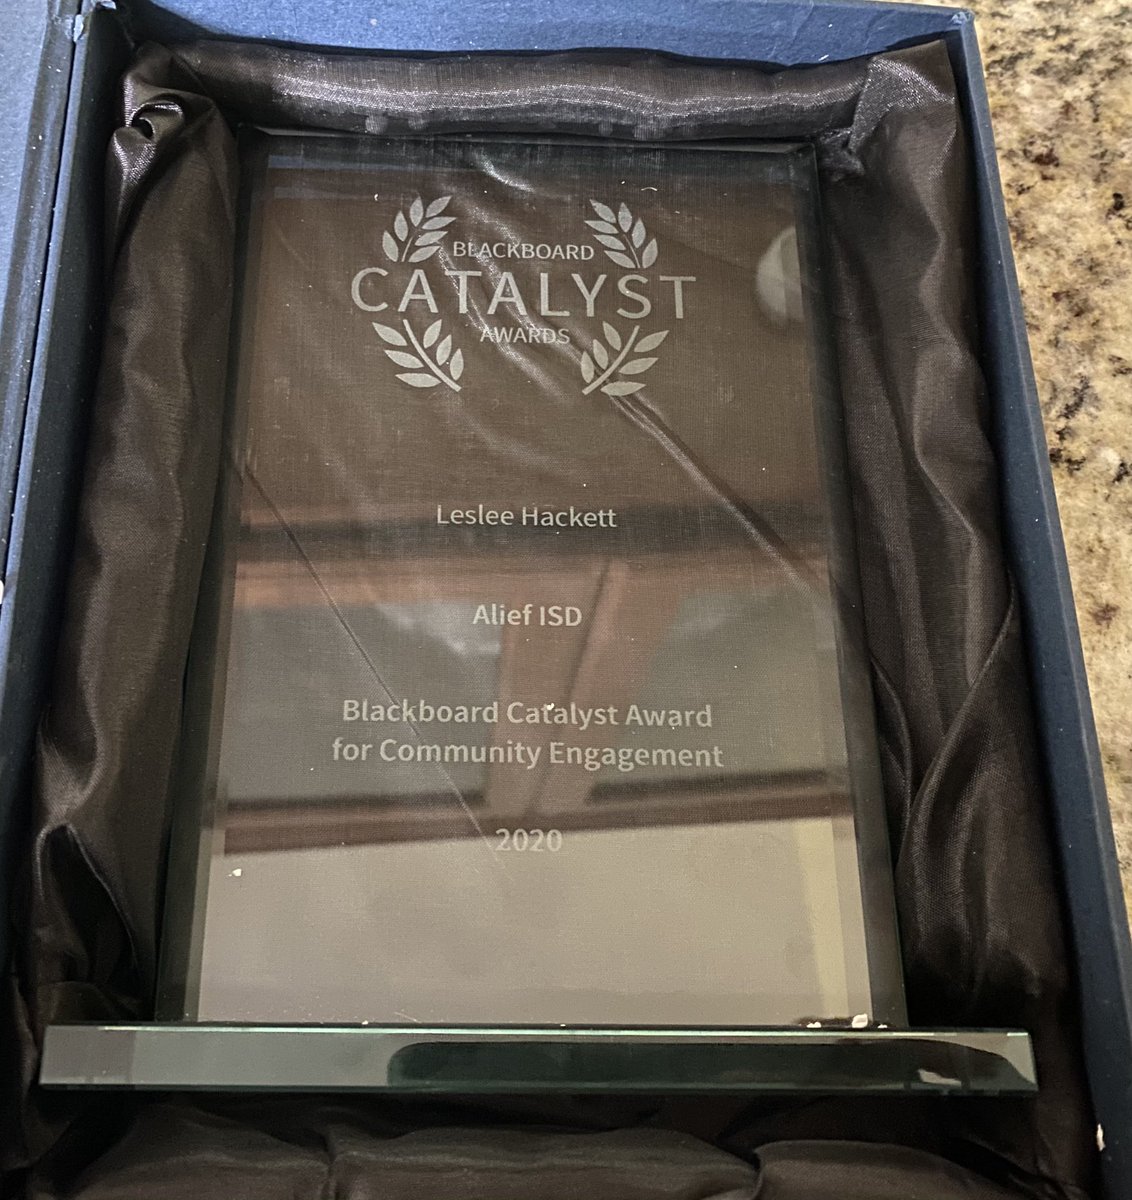 Super blessed to have won the 
Blackboard Catalyst Award for Community Engagement!! 

Always looking forward to keep using multi-platform communication to strengthen the districts brand and perception within the Alief community. 

#aliefleads and always #aliefproud